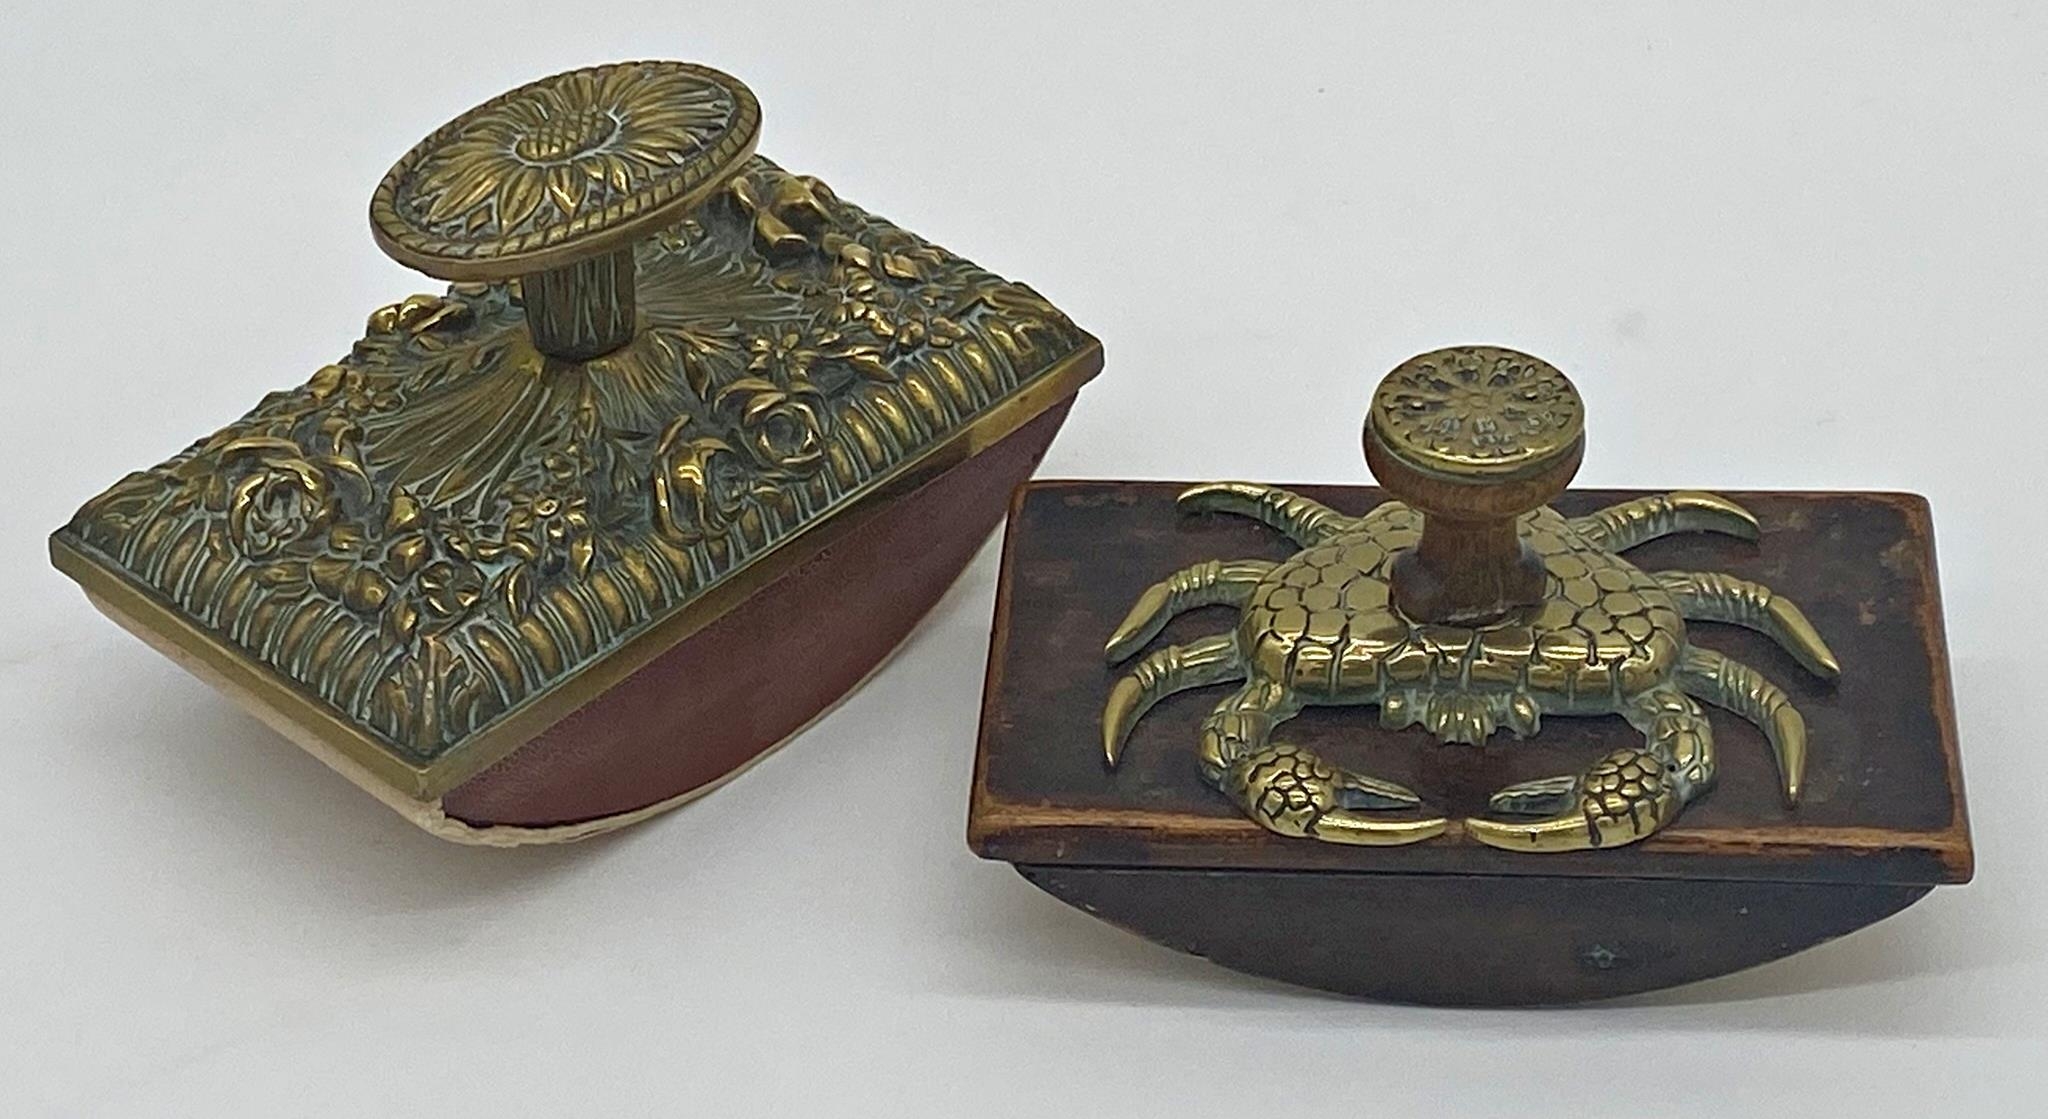 Unusual novelty blotter the top mounted by a brass crab together with a further embossed brass